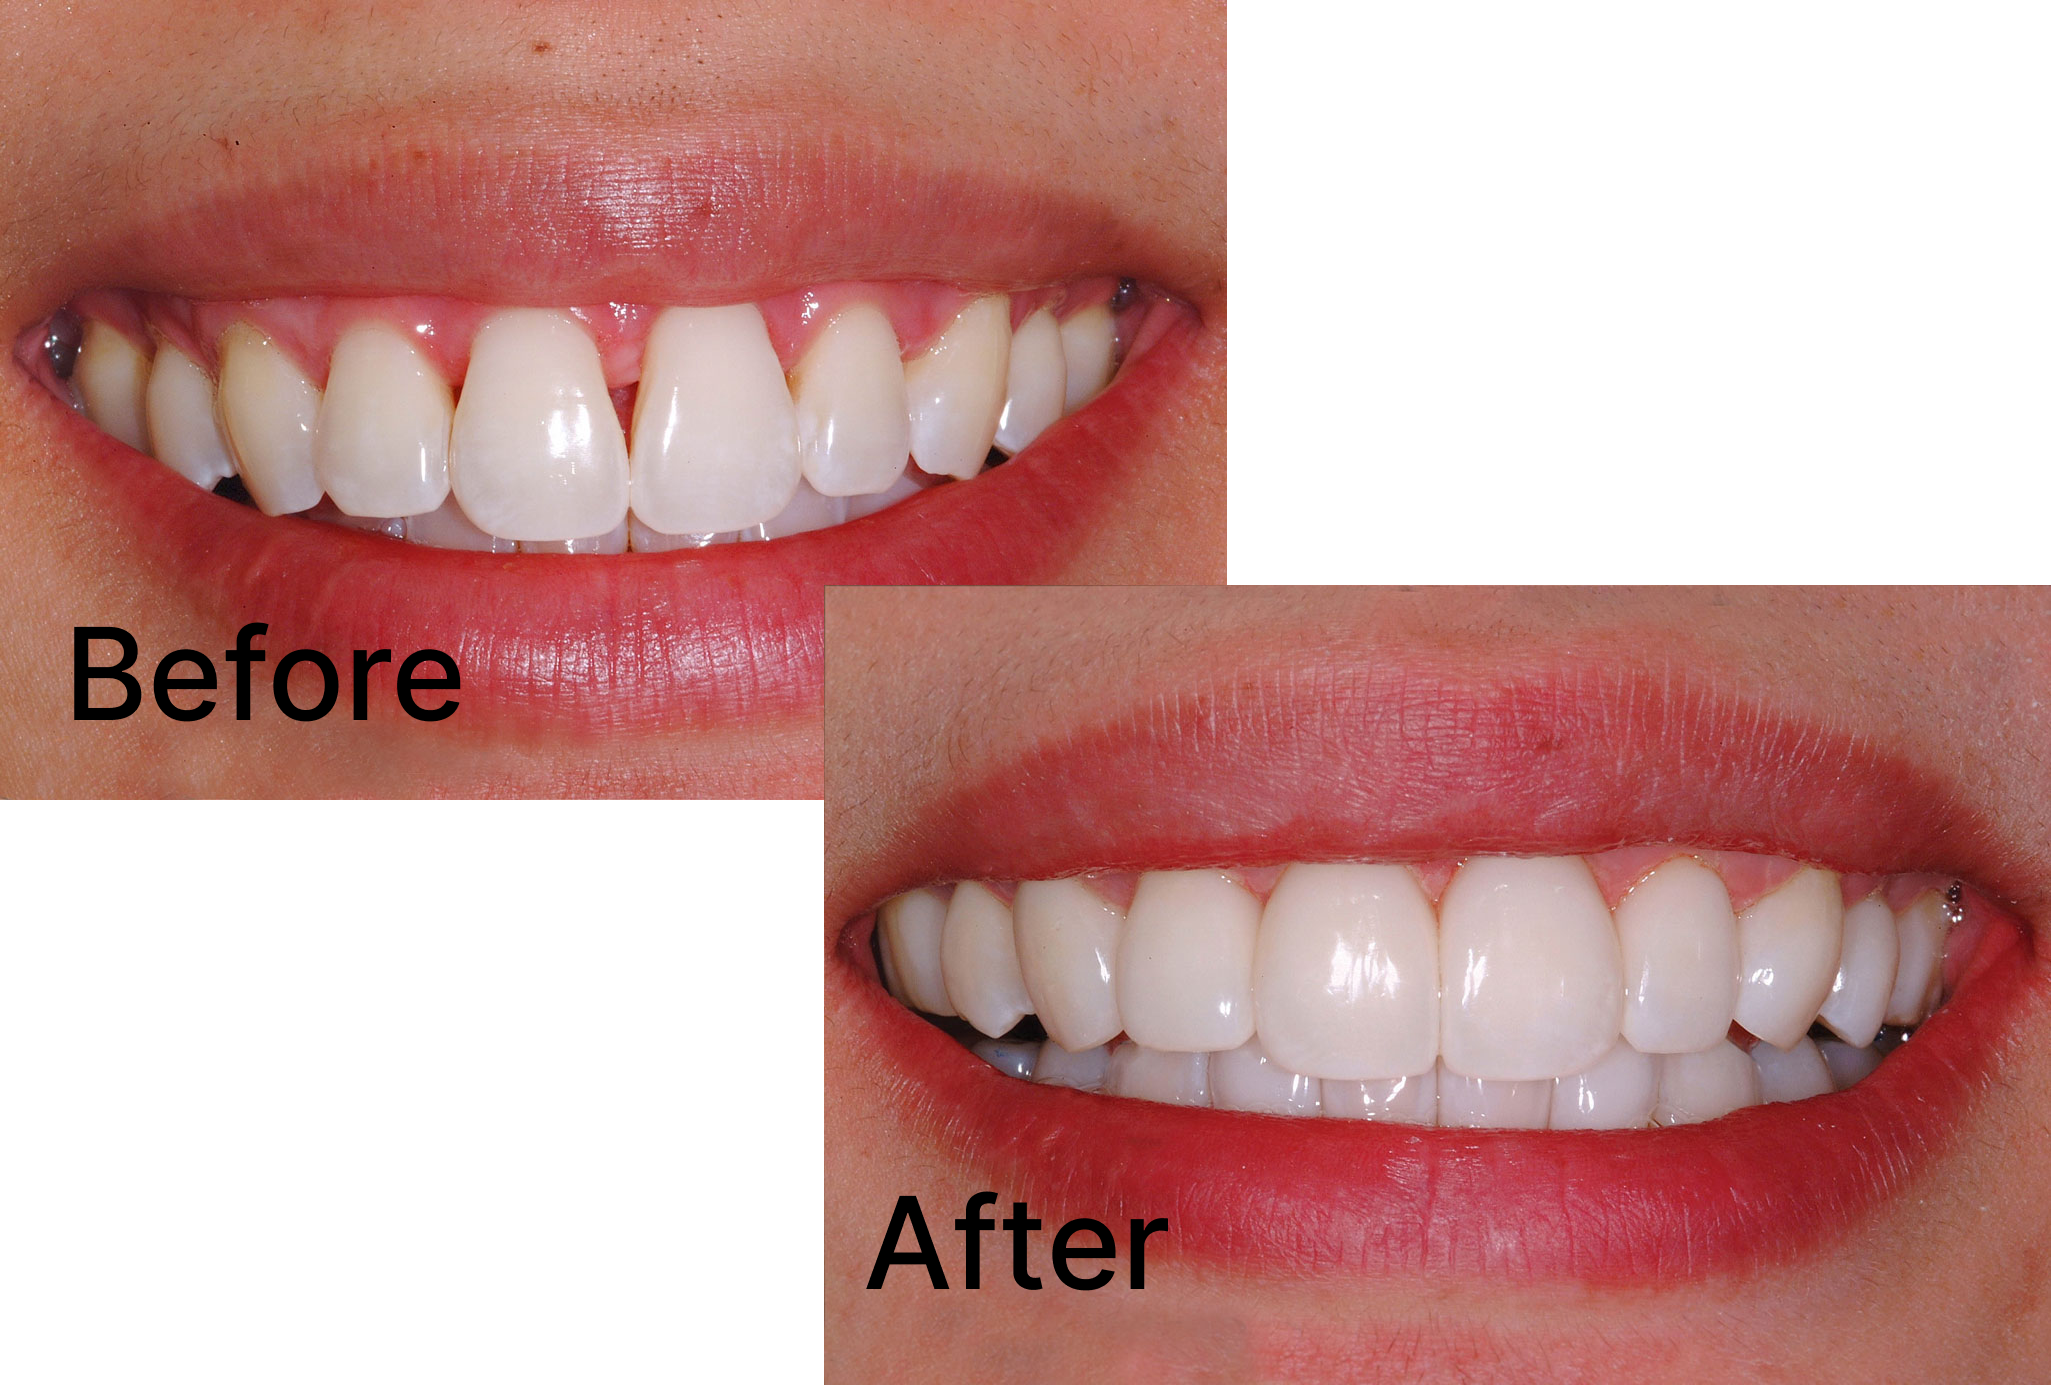 Do you dislike your front teeth but are hesitant to get veneers because of the cost?